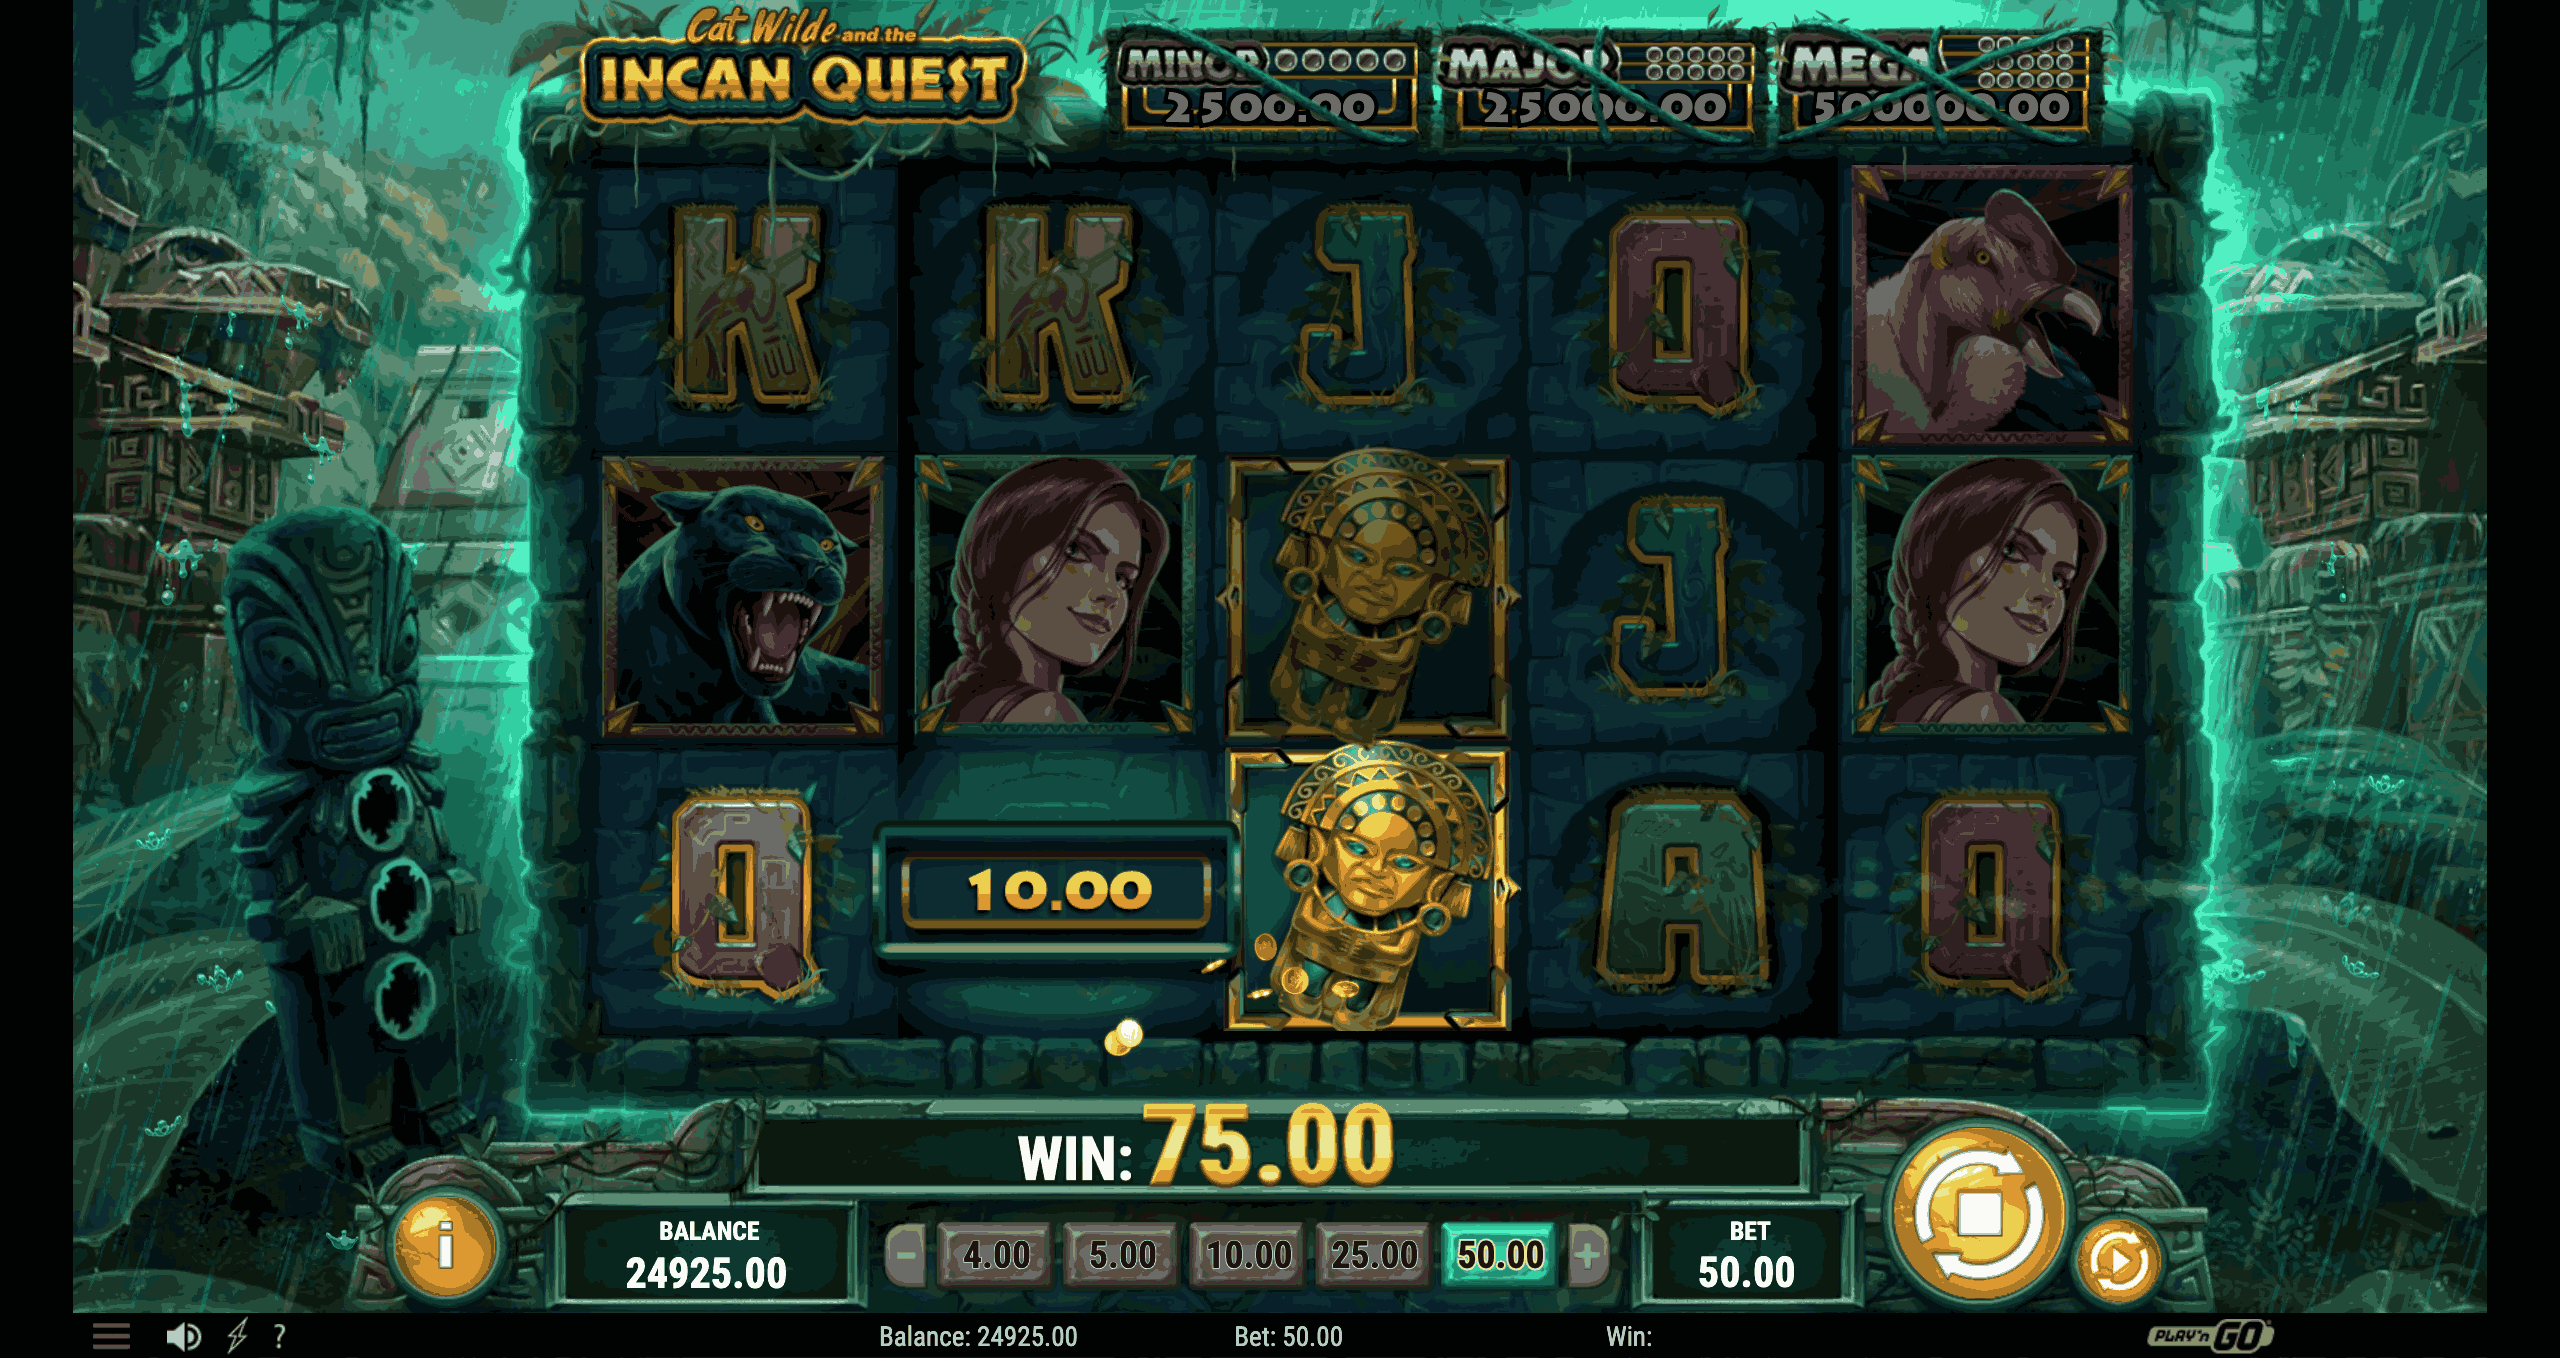 Cat Wilde and the Incan Quest Slot Review main